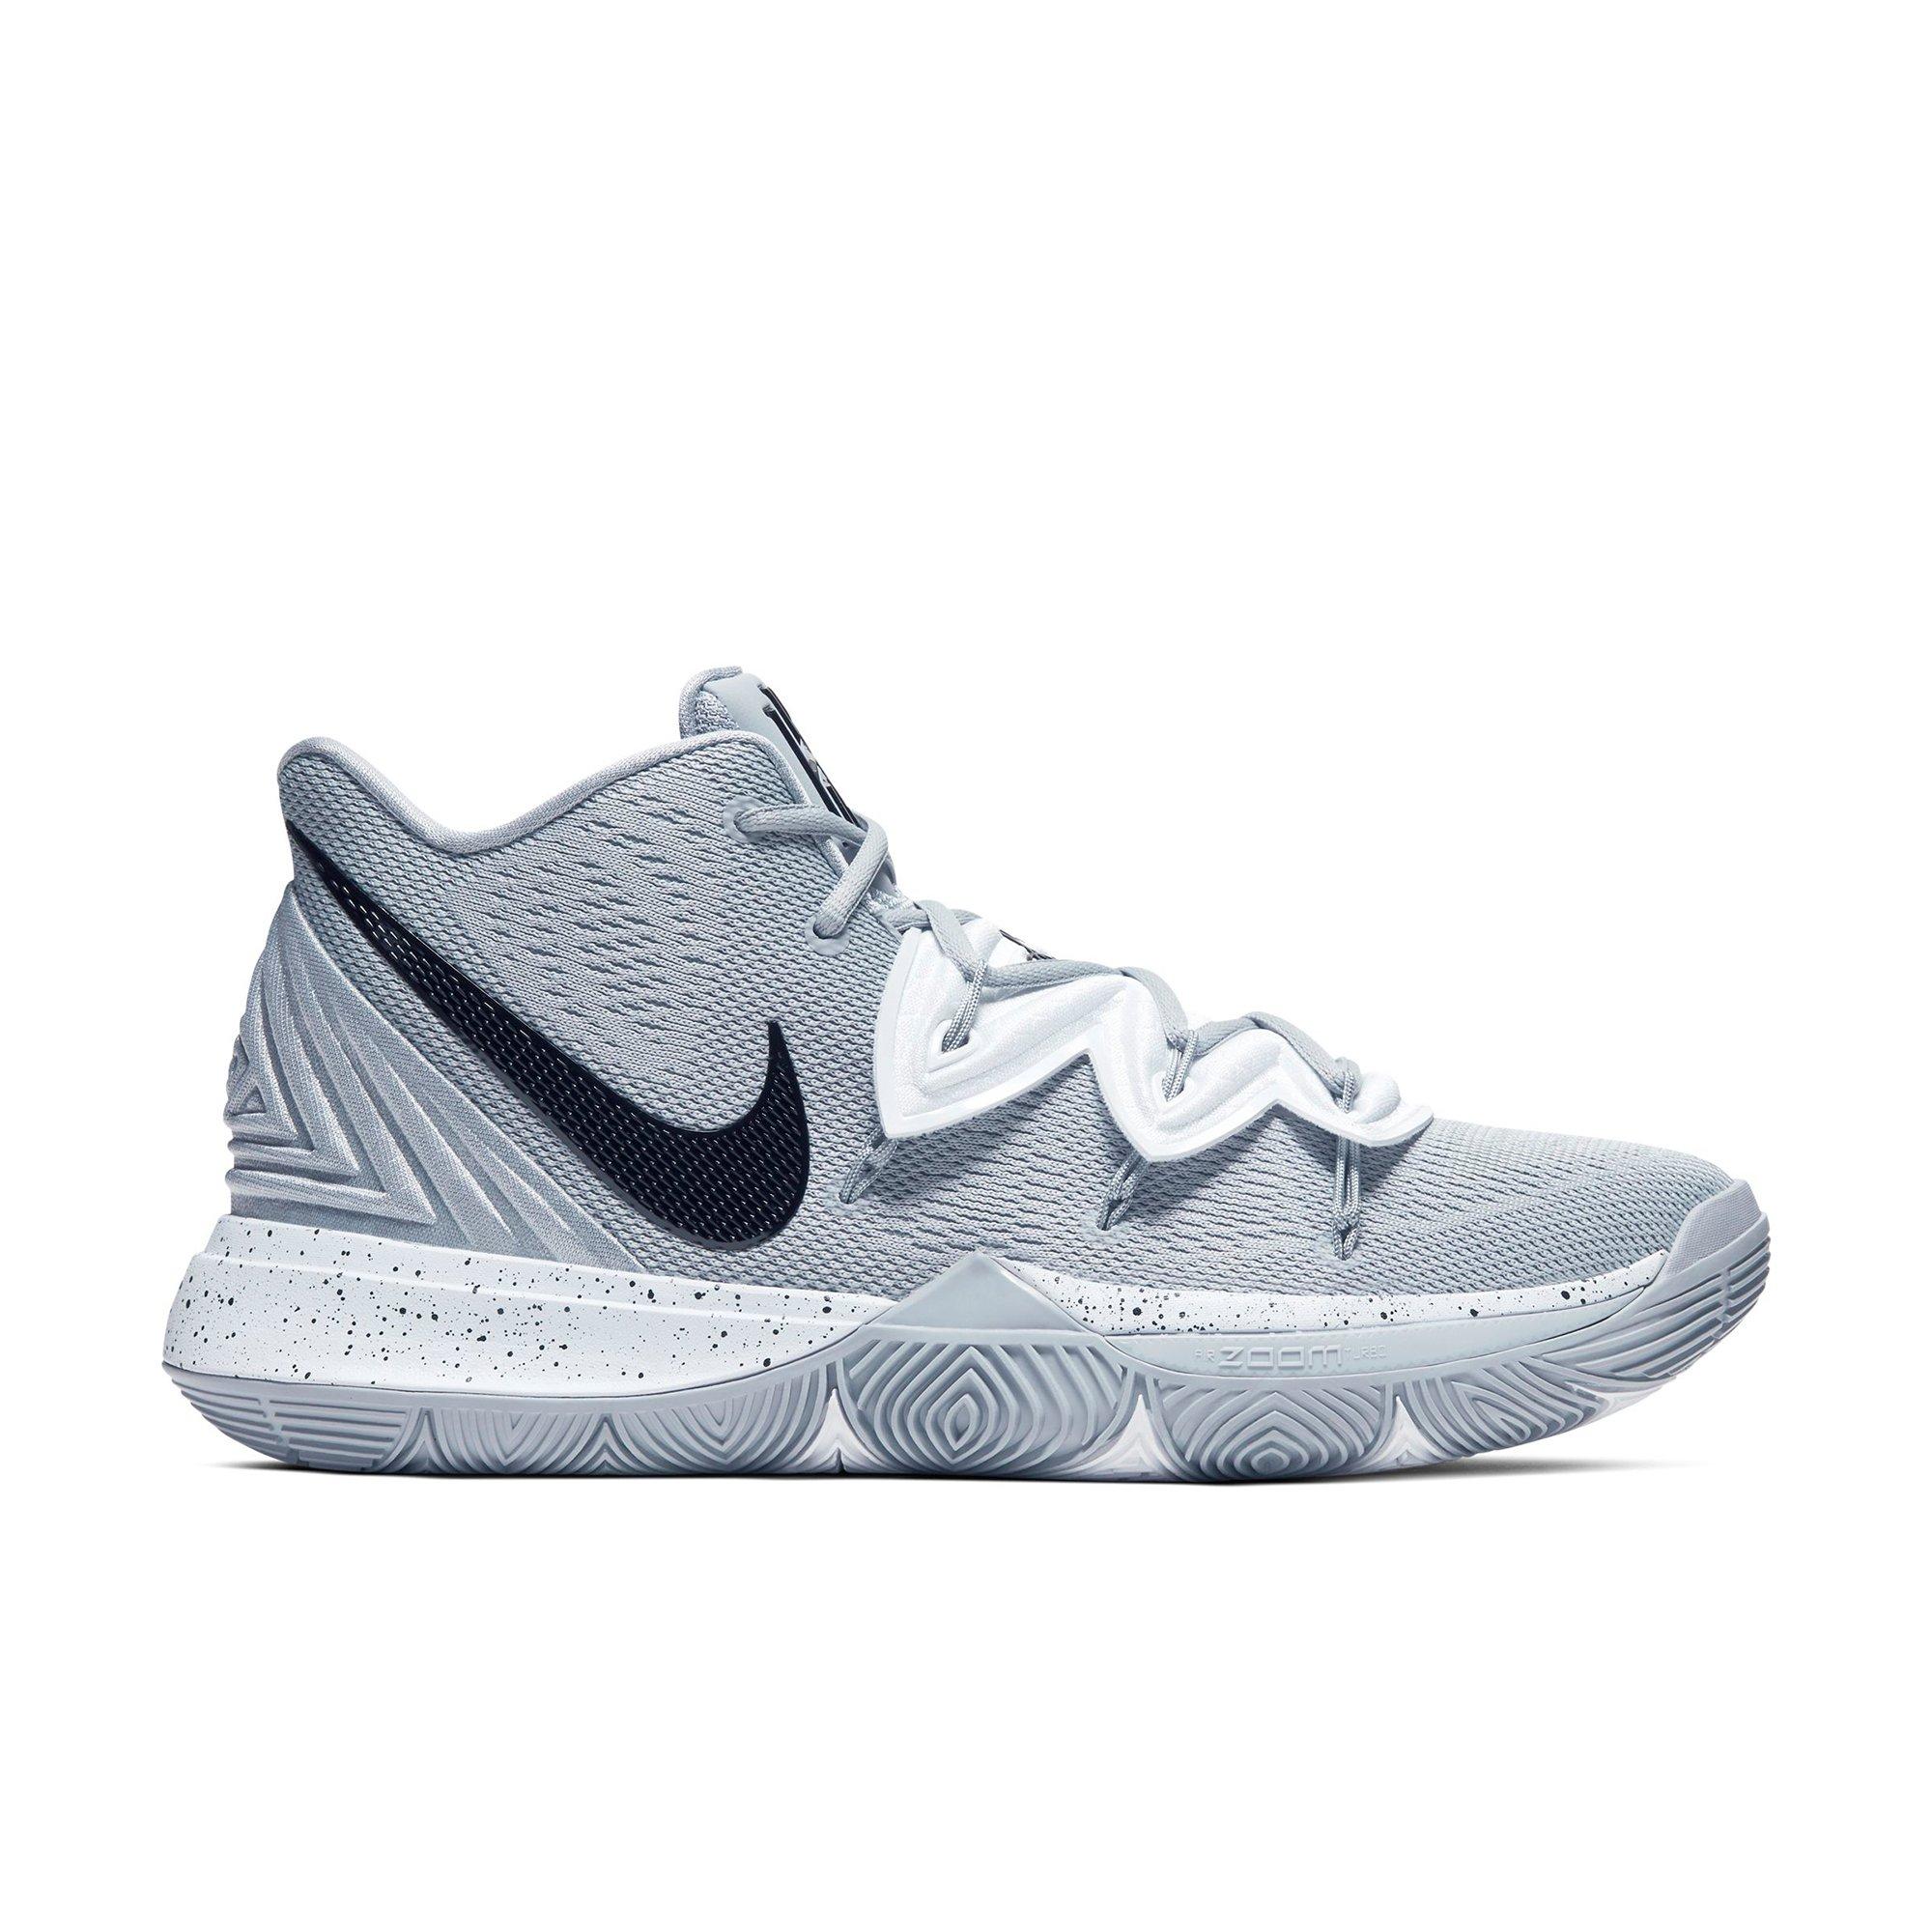 kyrie irving youth shoes